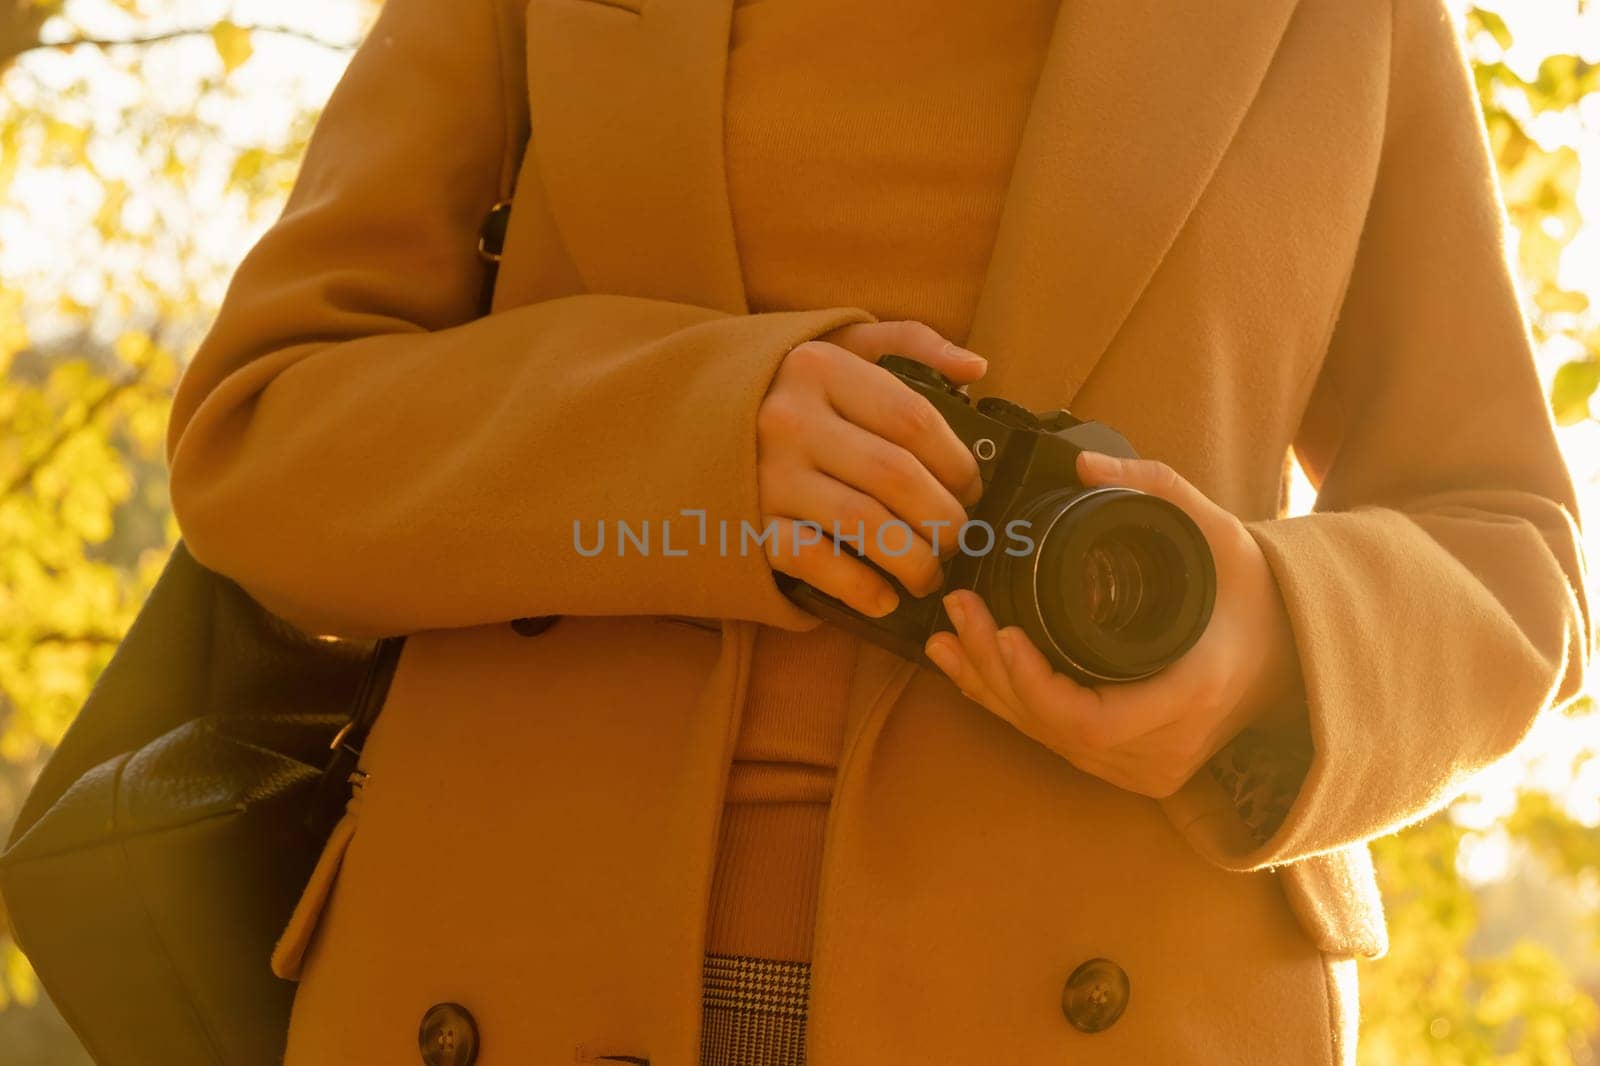 A woman in a brown coat holding a retro camera in her hands against trees with yellow leaves in the park